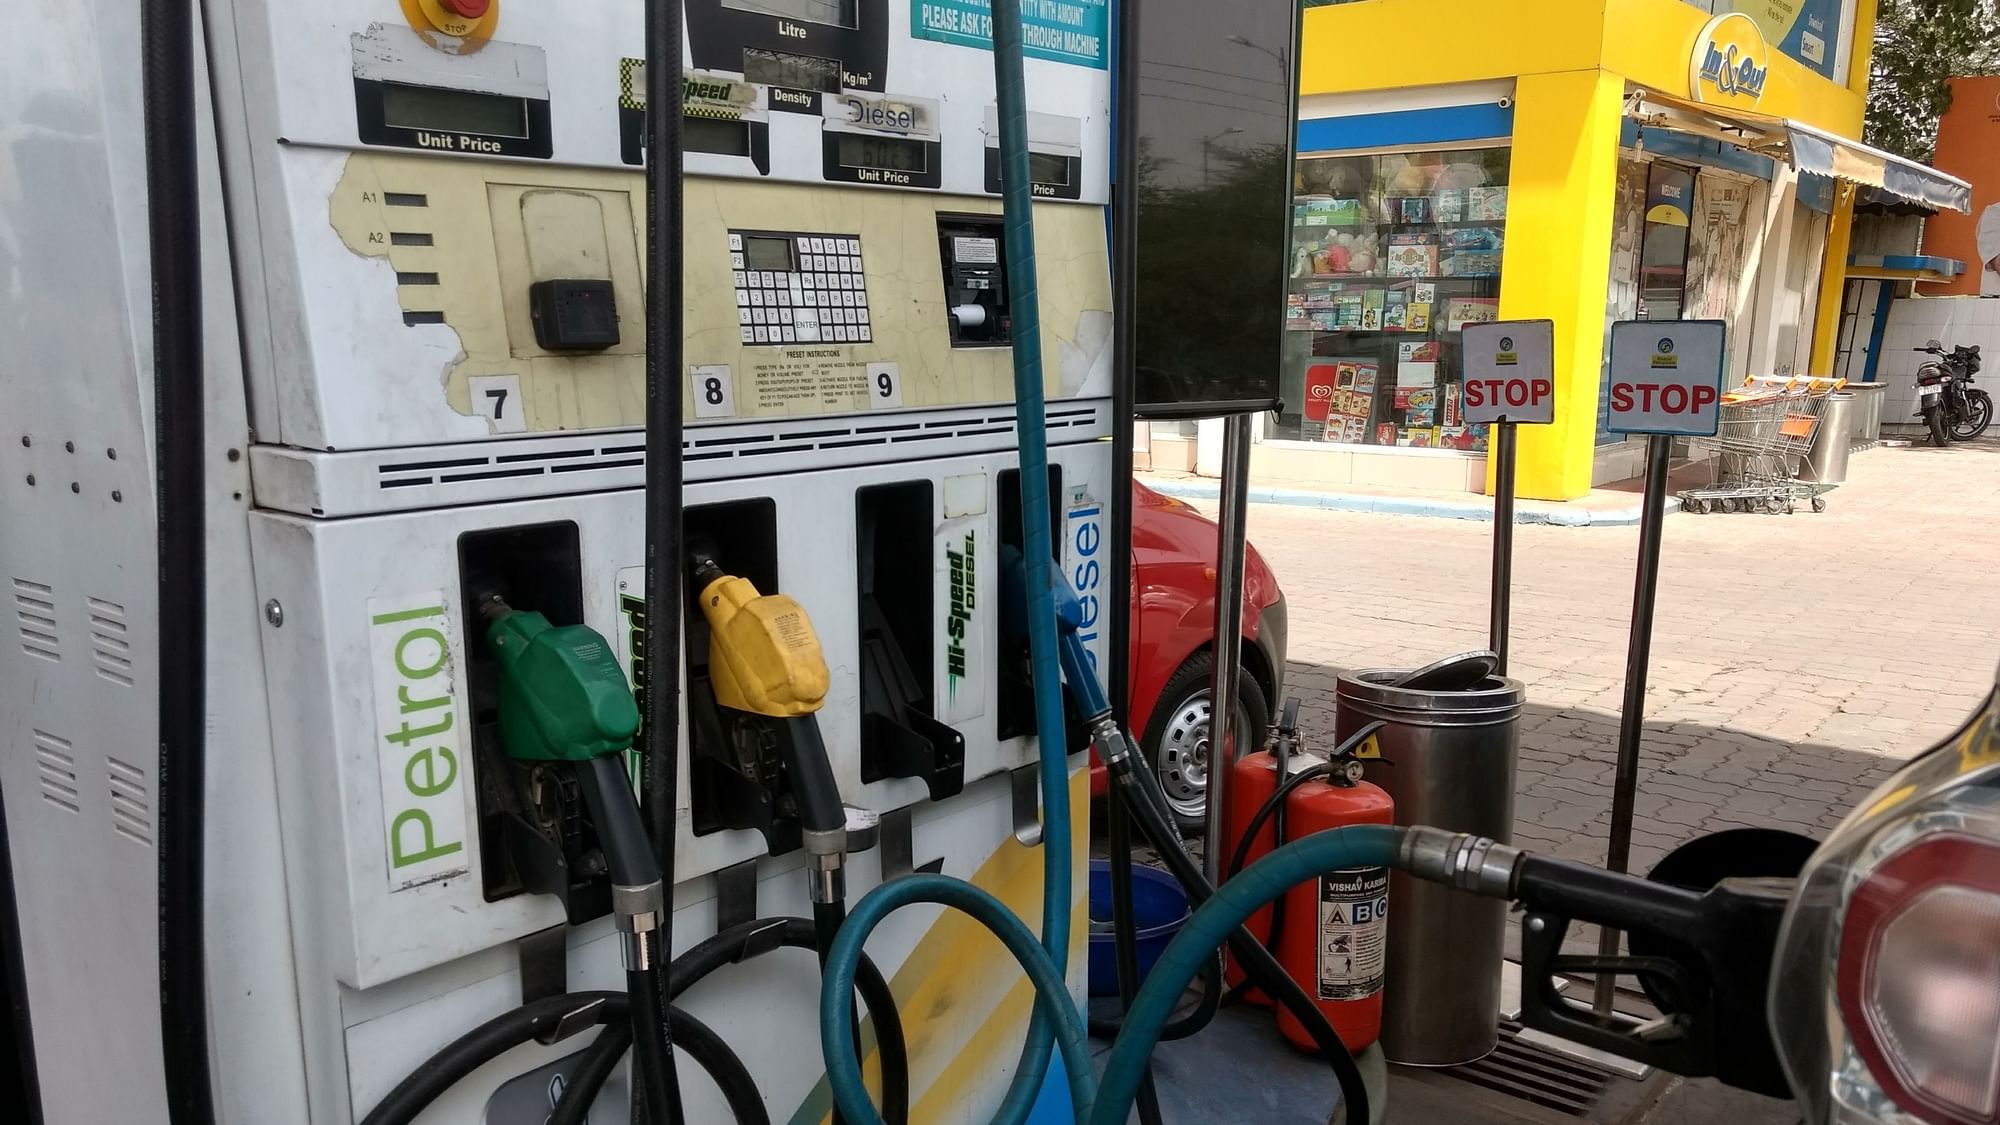 While crude oil prices are down nearly 40 percent, fuel prices haven’t gone done even 10 percent at the pump.